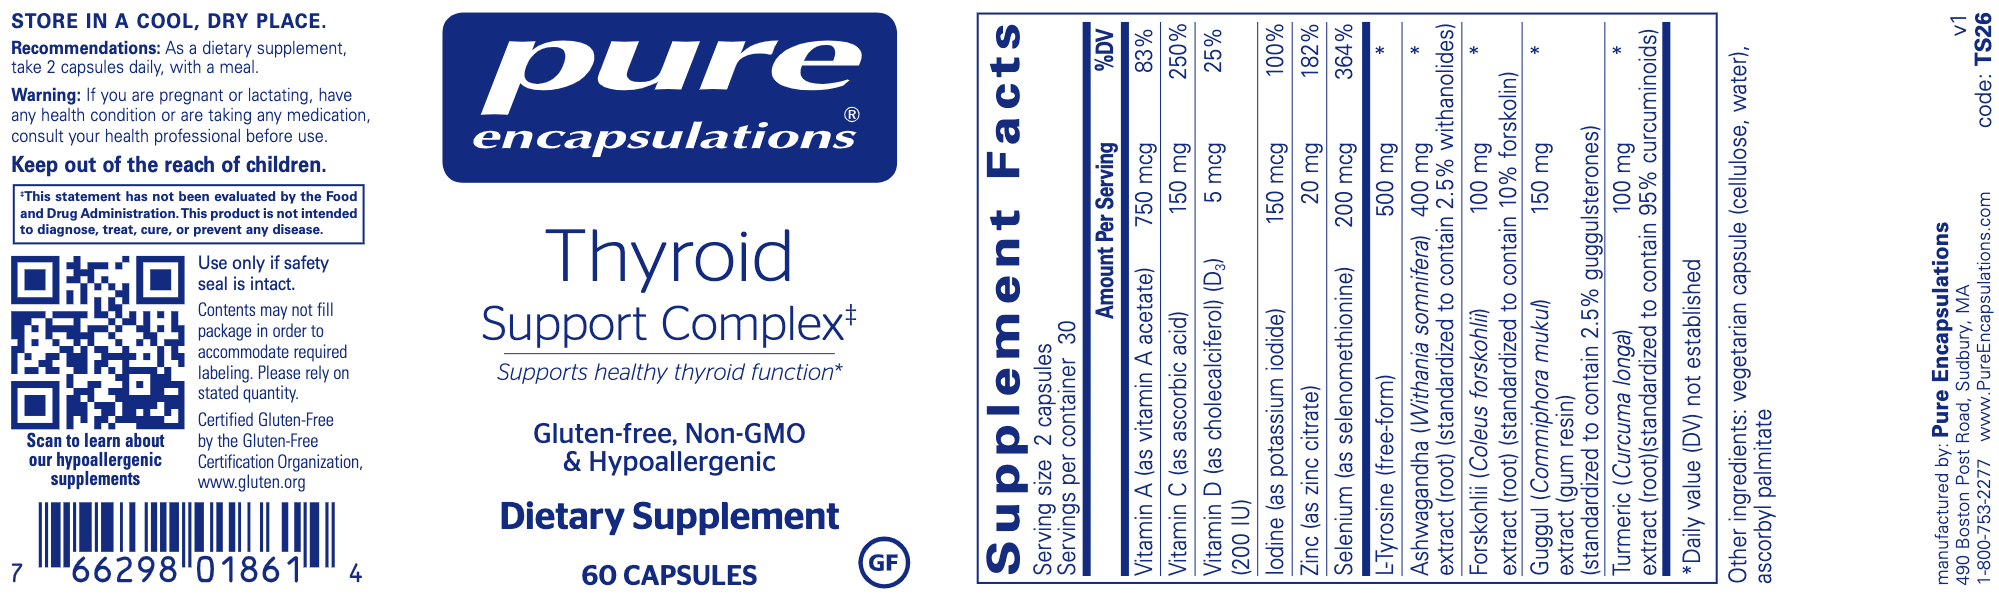 Thyroid Support Complex-Vitamins & Supplements-Pure Encapsulations-60 Capsules-Pine Street Clinic